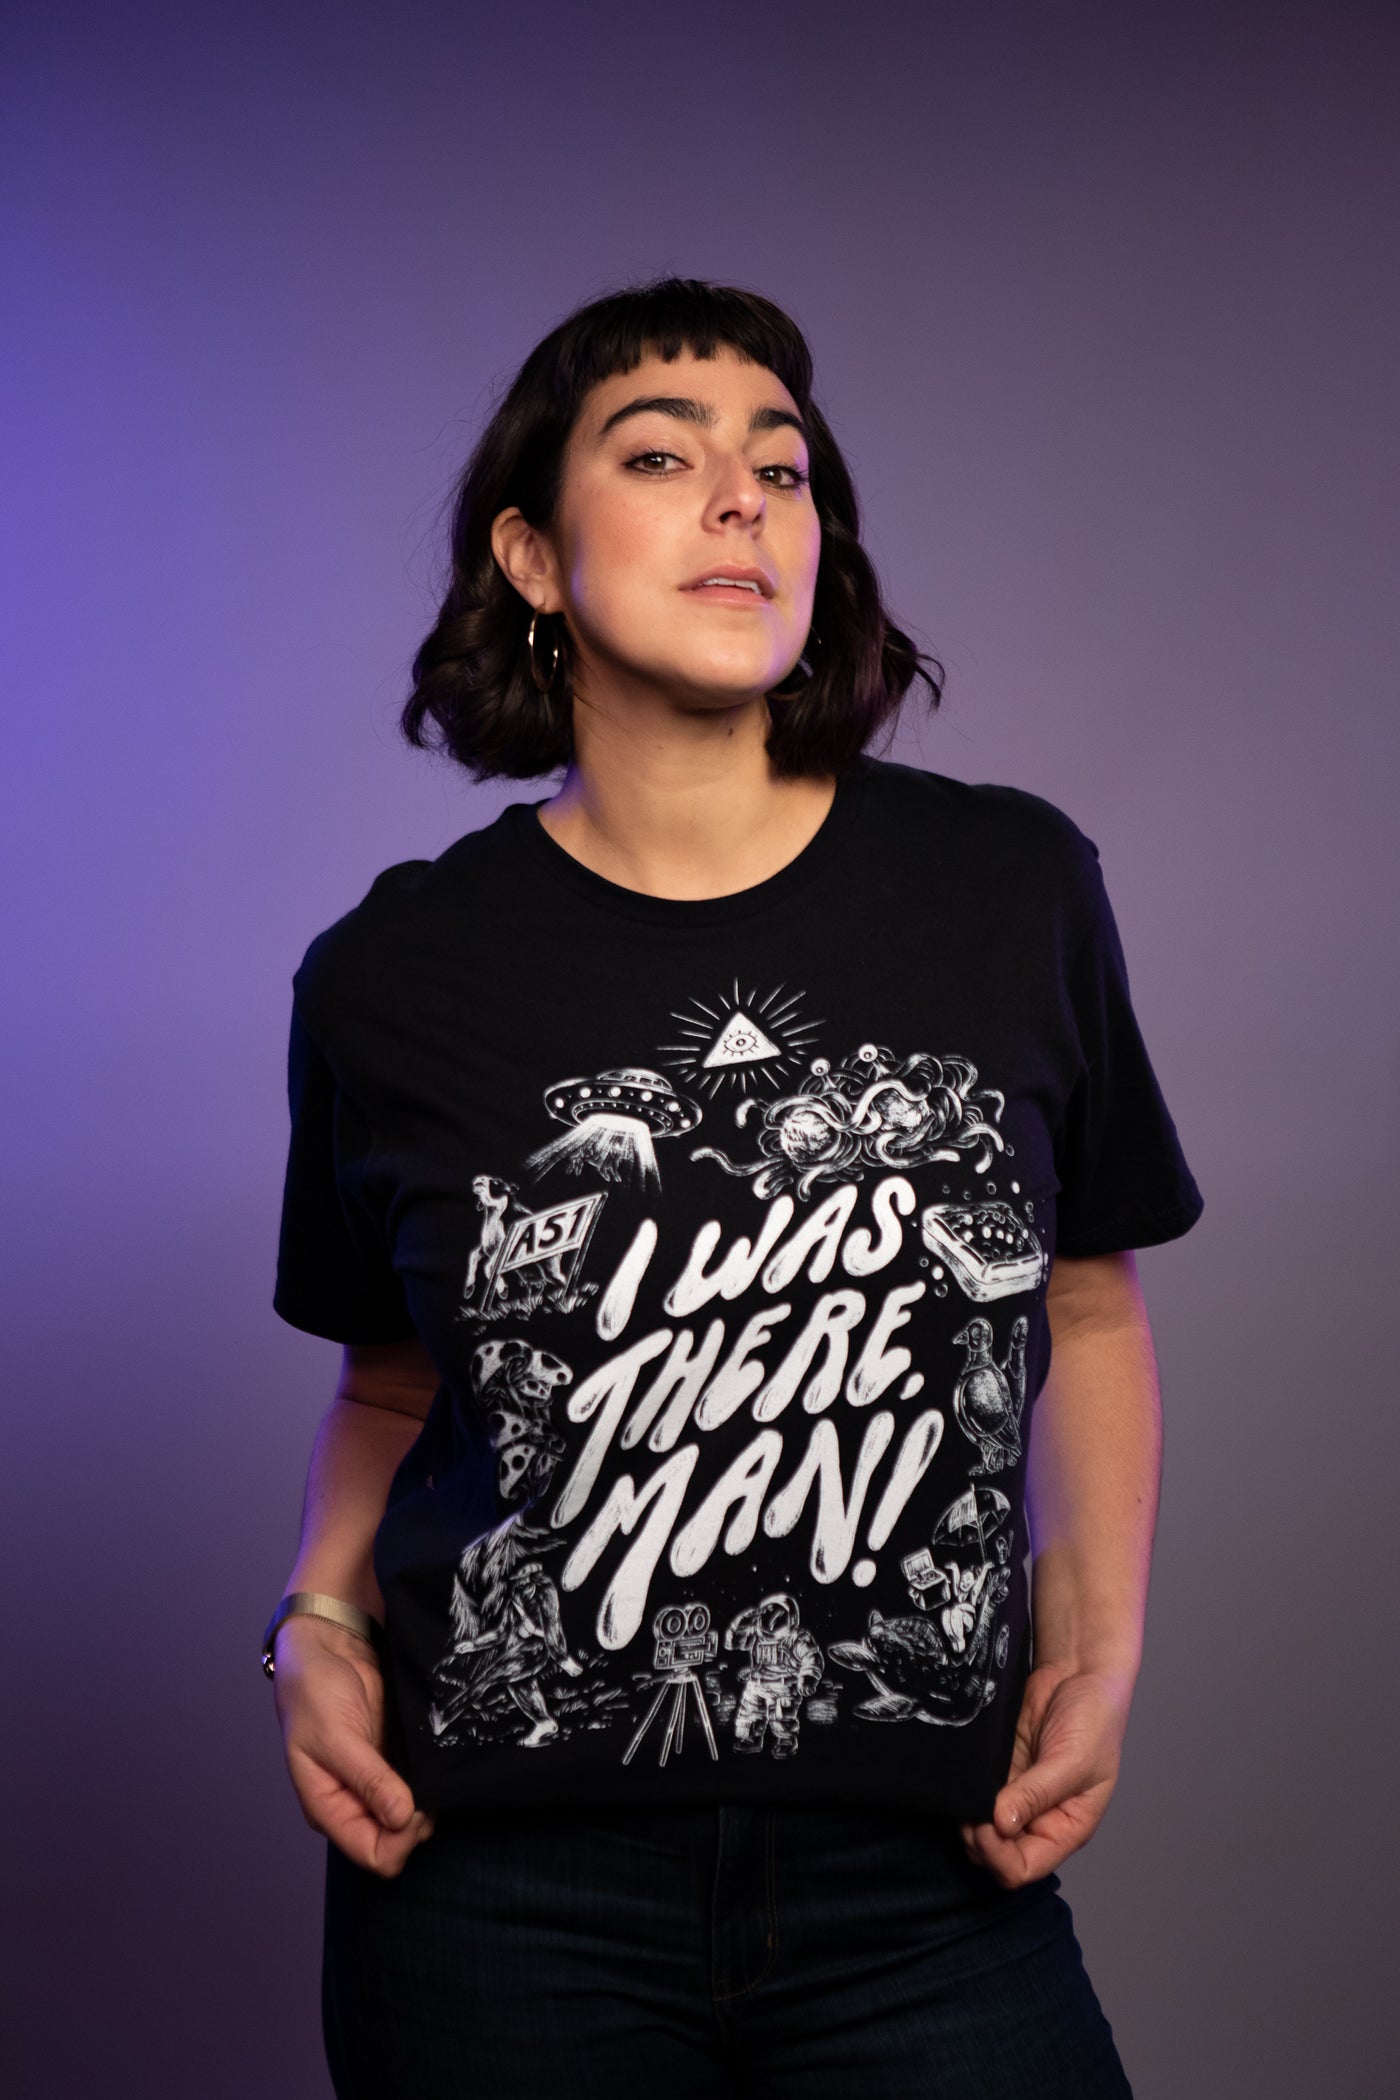 I Was There Man Tee - Heather Black